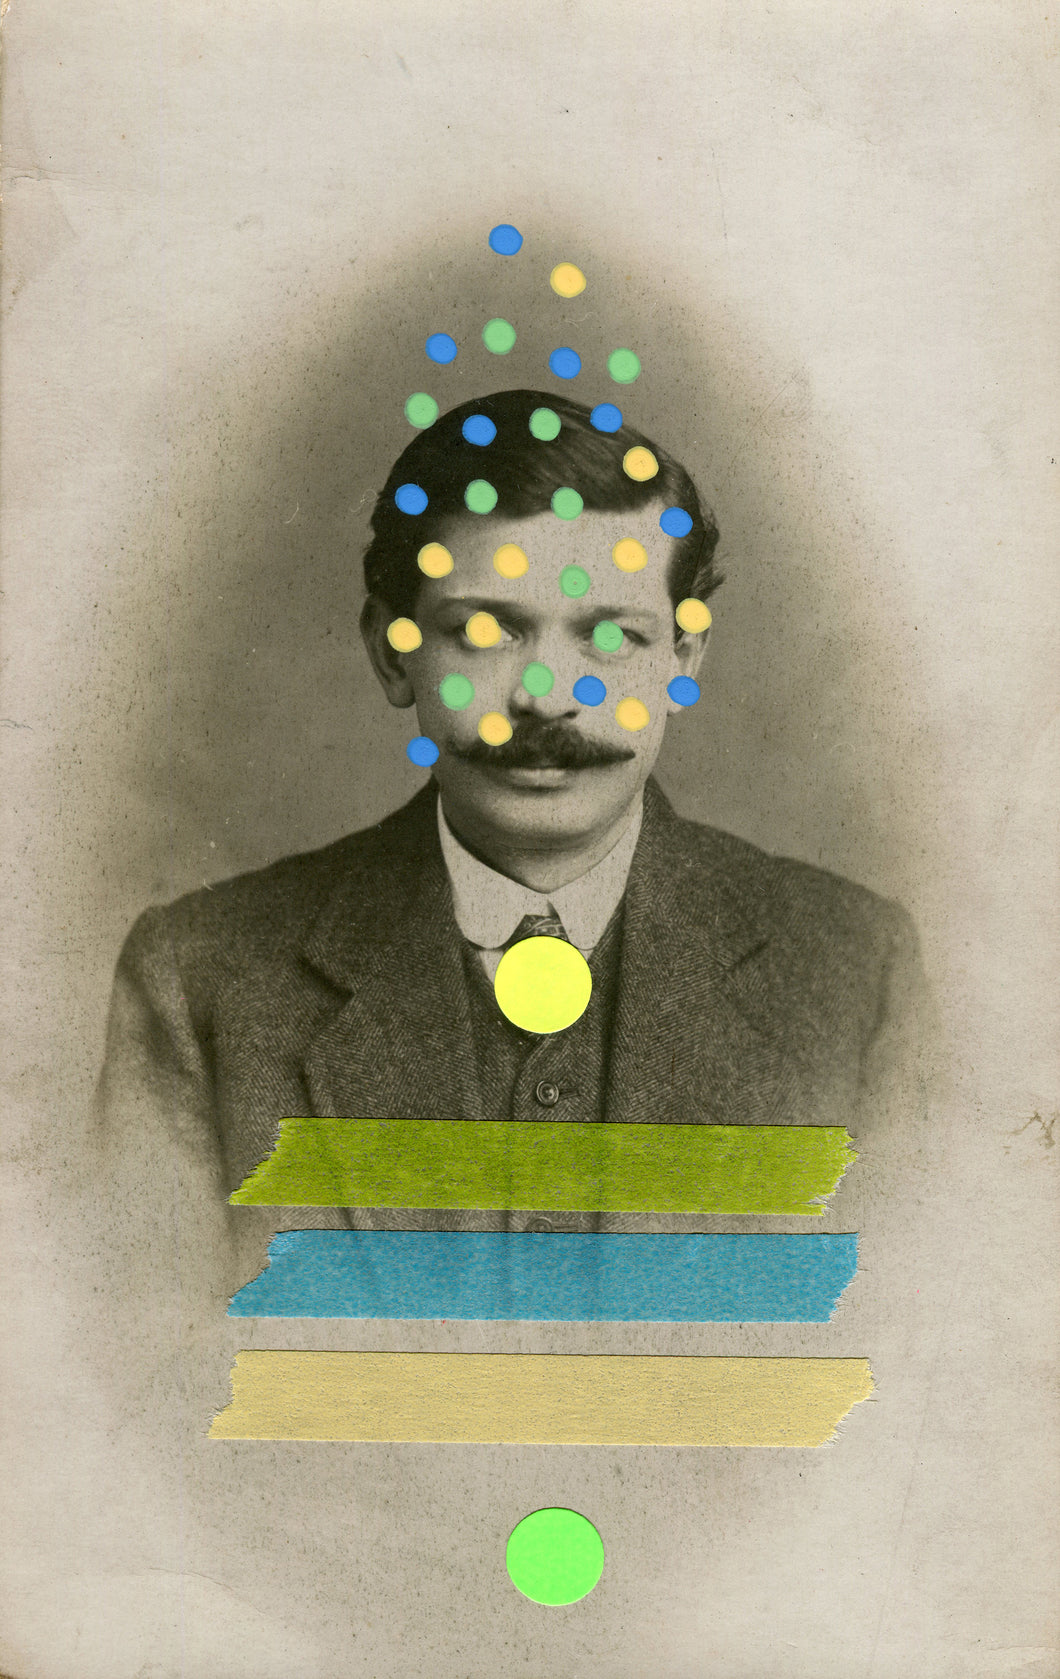 Vintage Man With Moustache Photography Altered By Hand - Naomi Vona Art